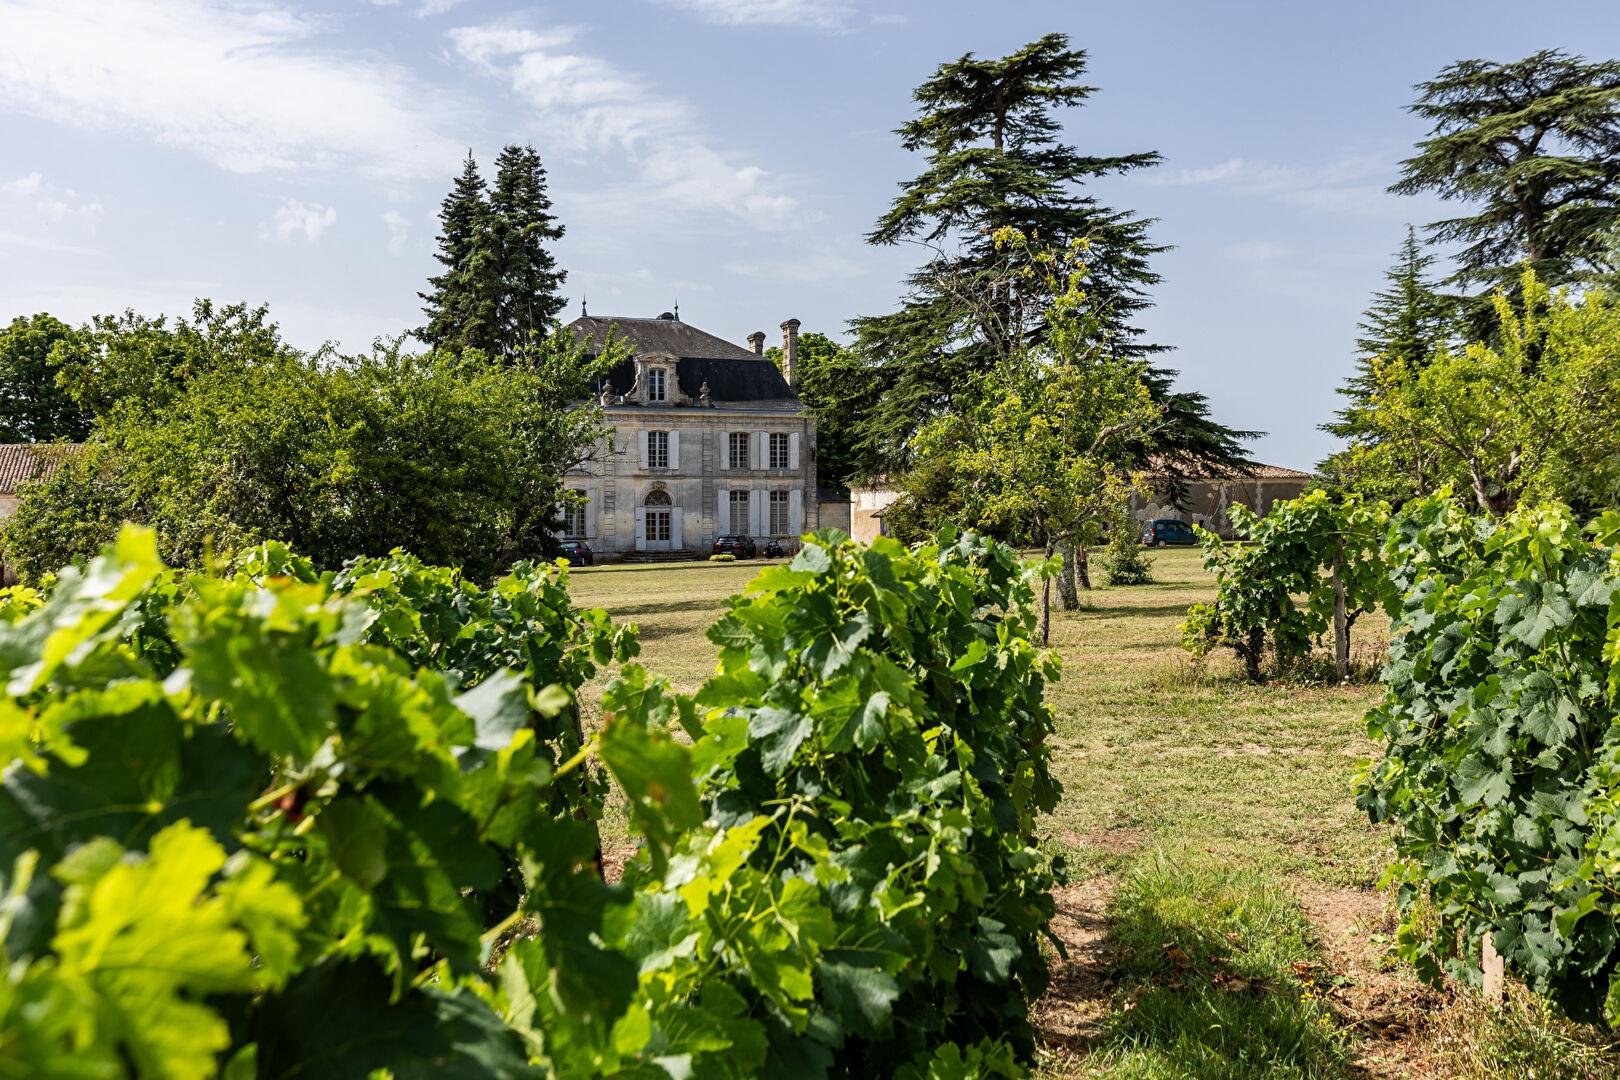 Francis York French Chateau and Vineyard Overlooking the Dordogne River m 3.jpg